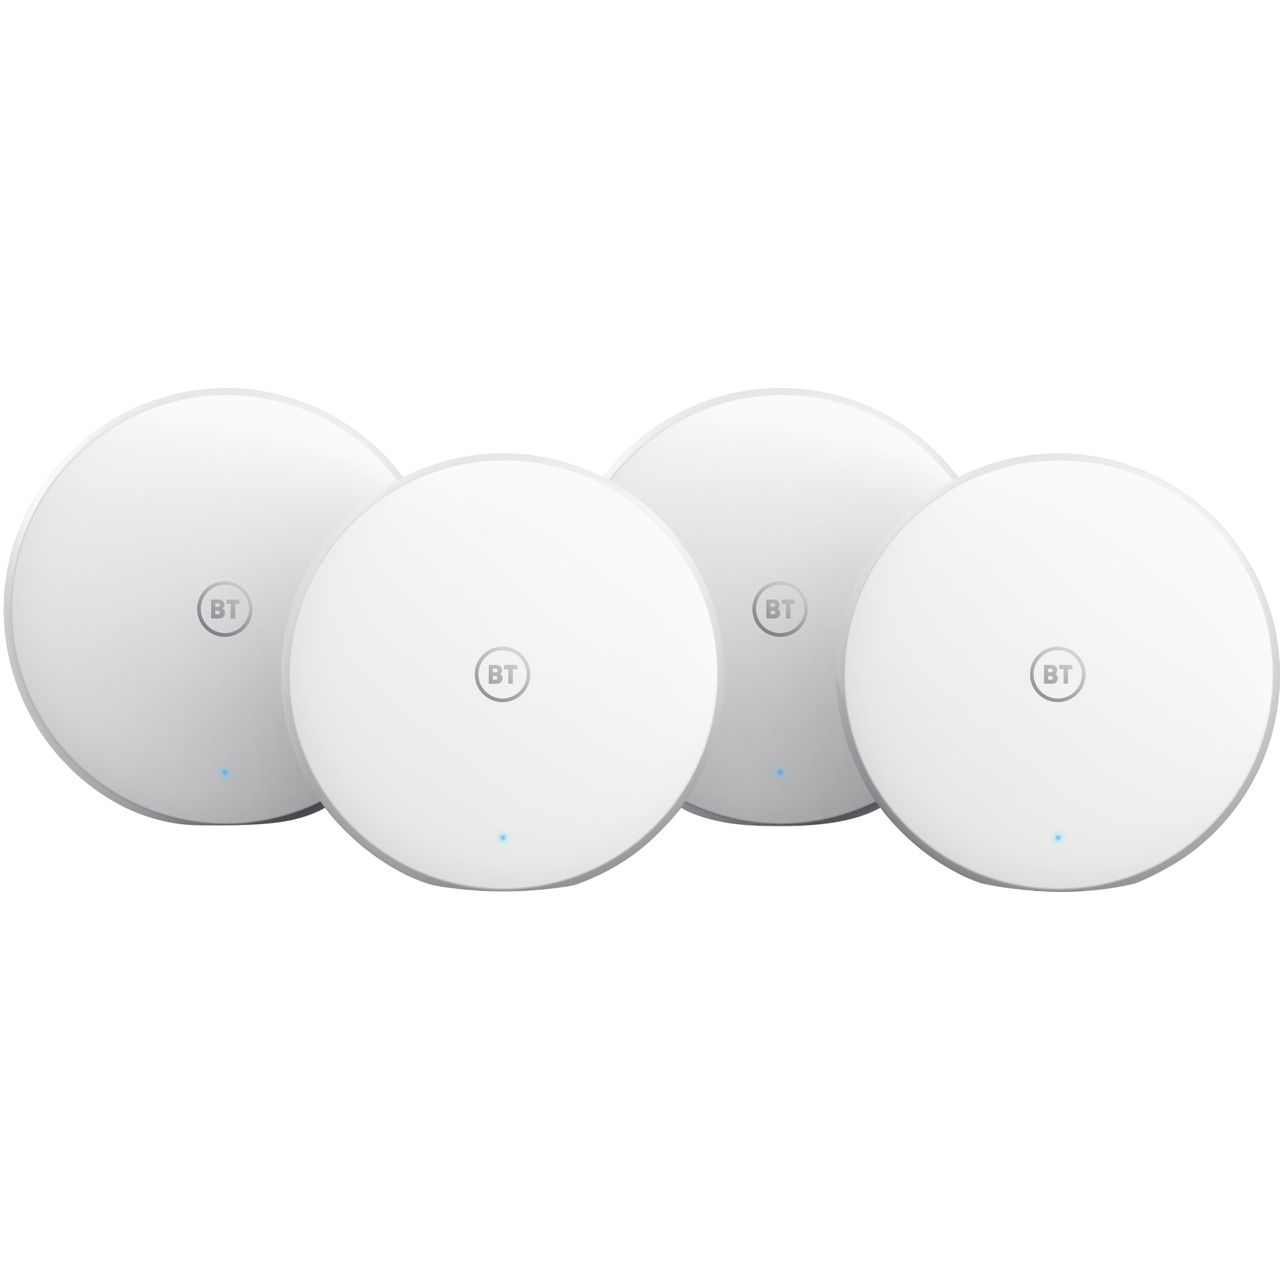 BT Mini Whole Home WiFi (4 Pack) for Mesh Network Review